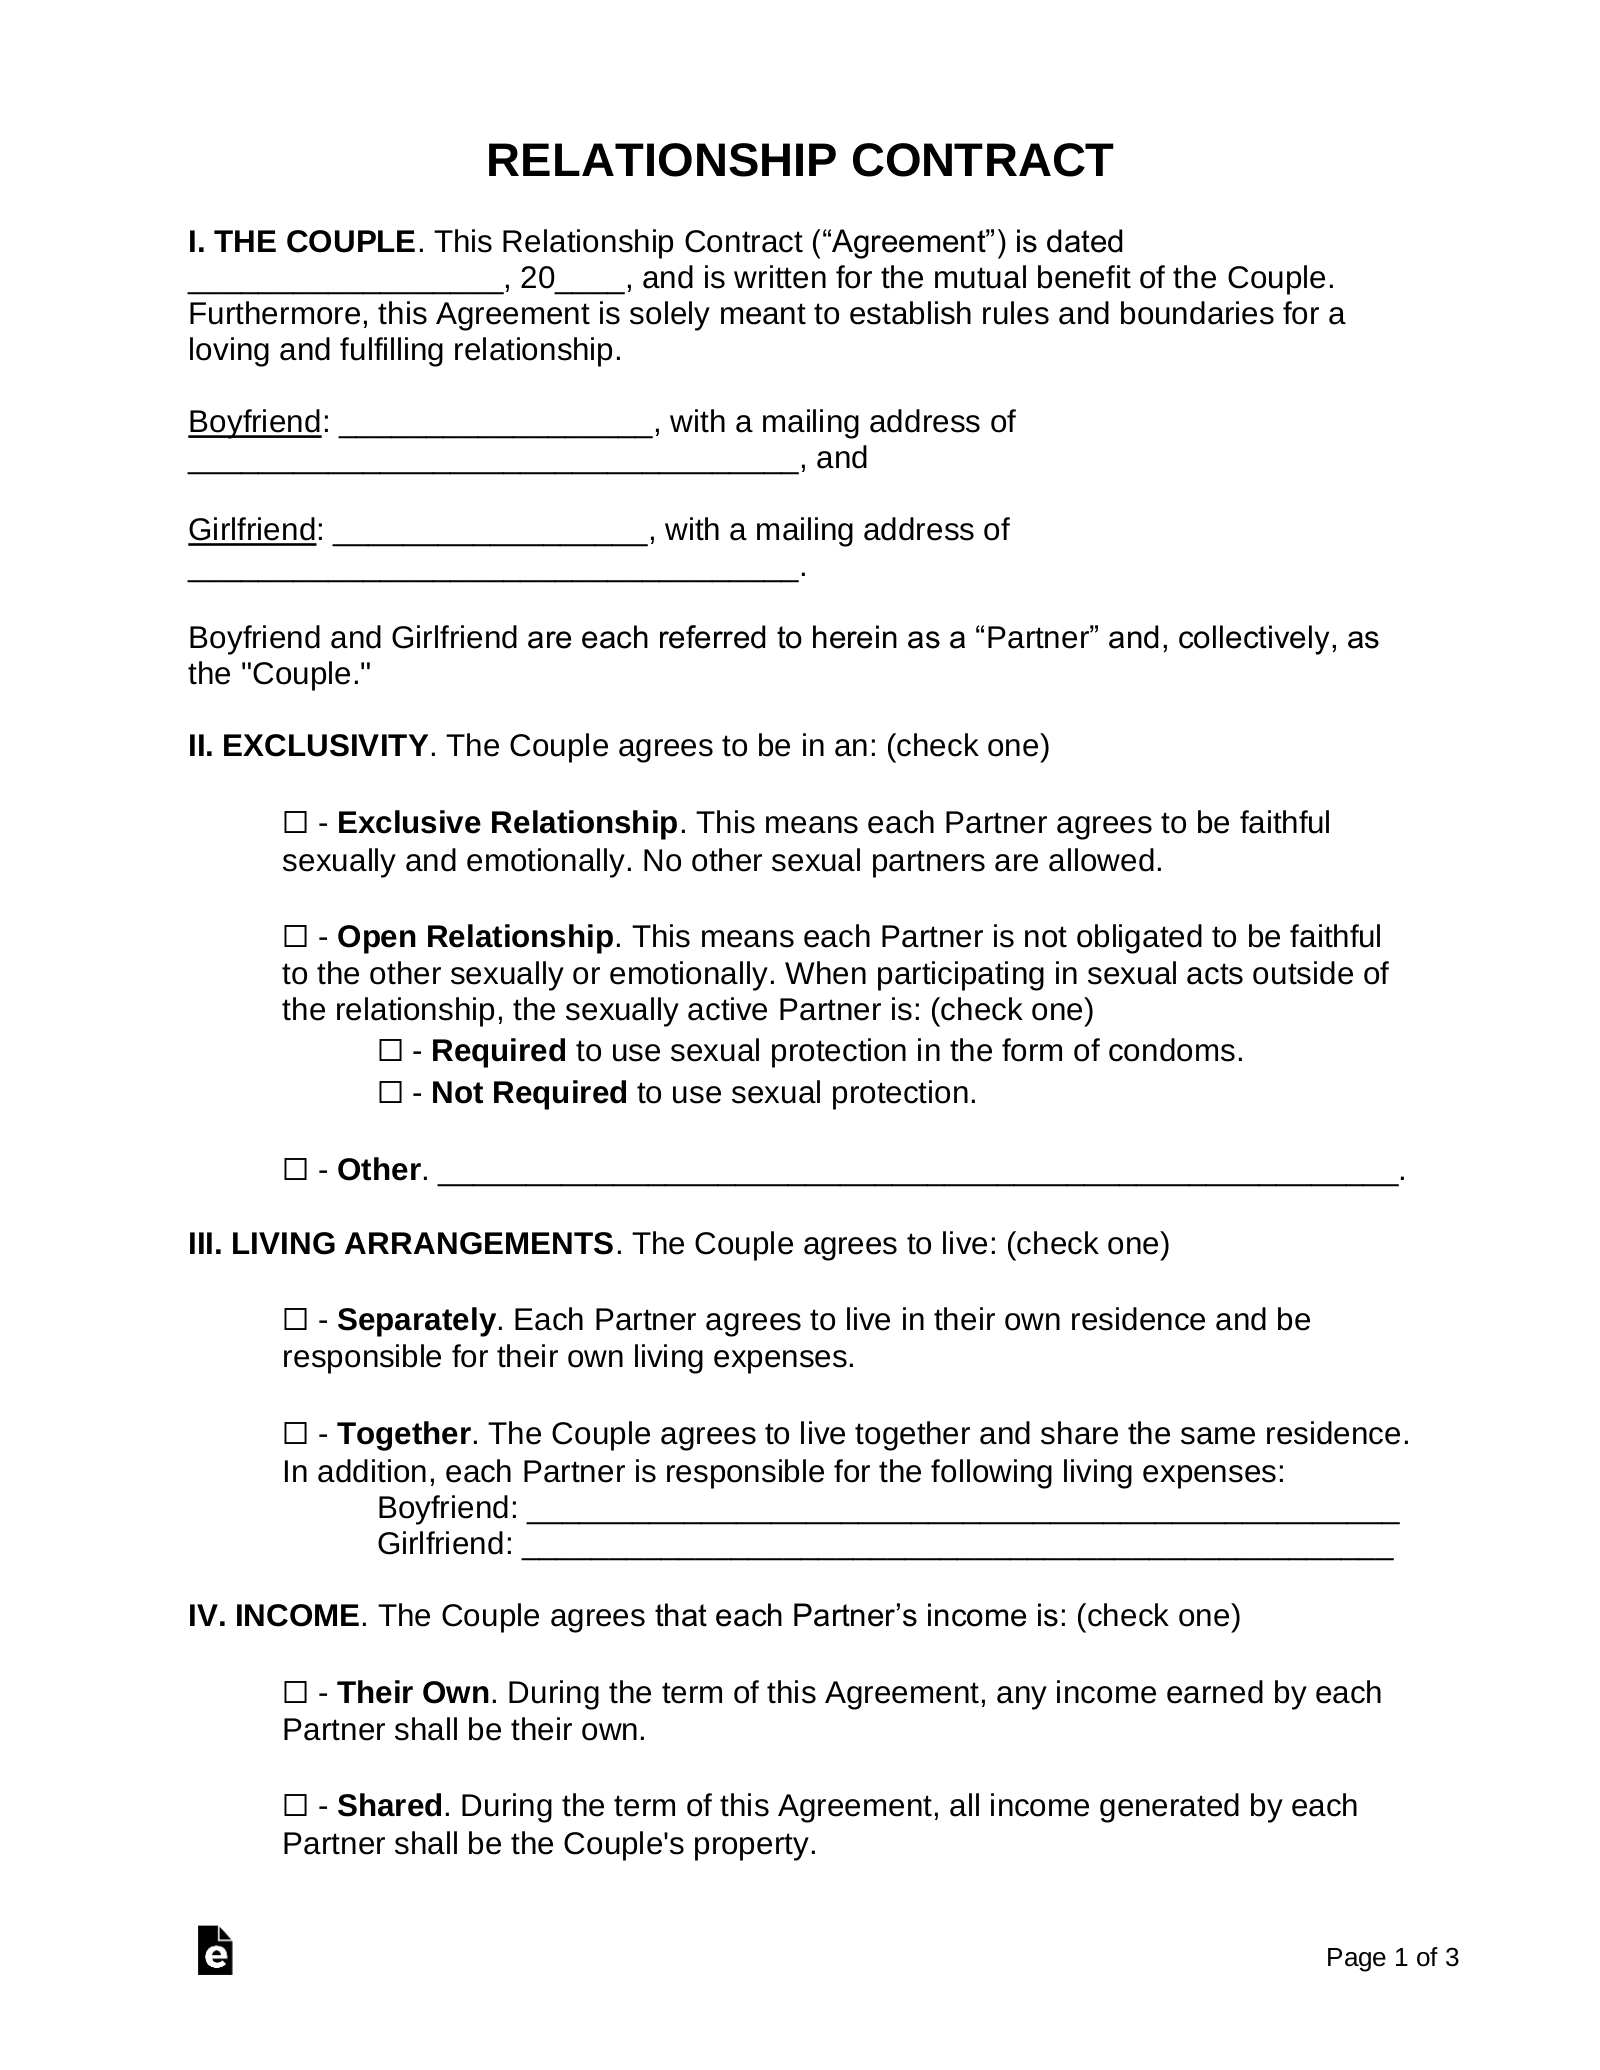 relationship contract form